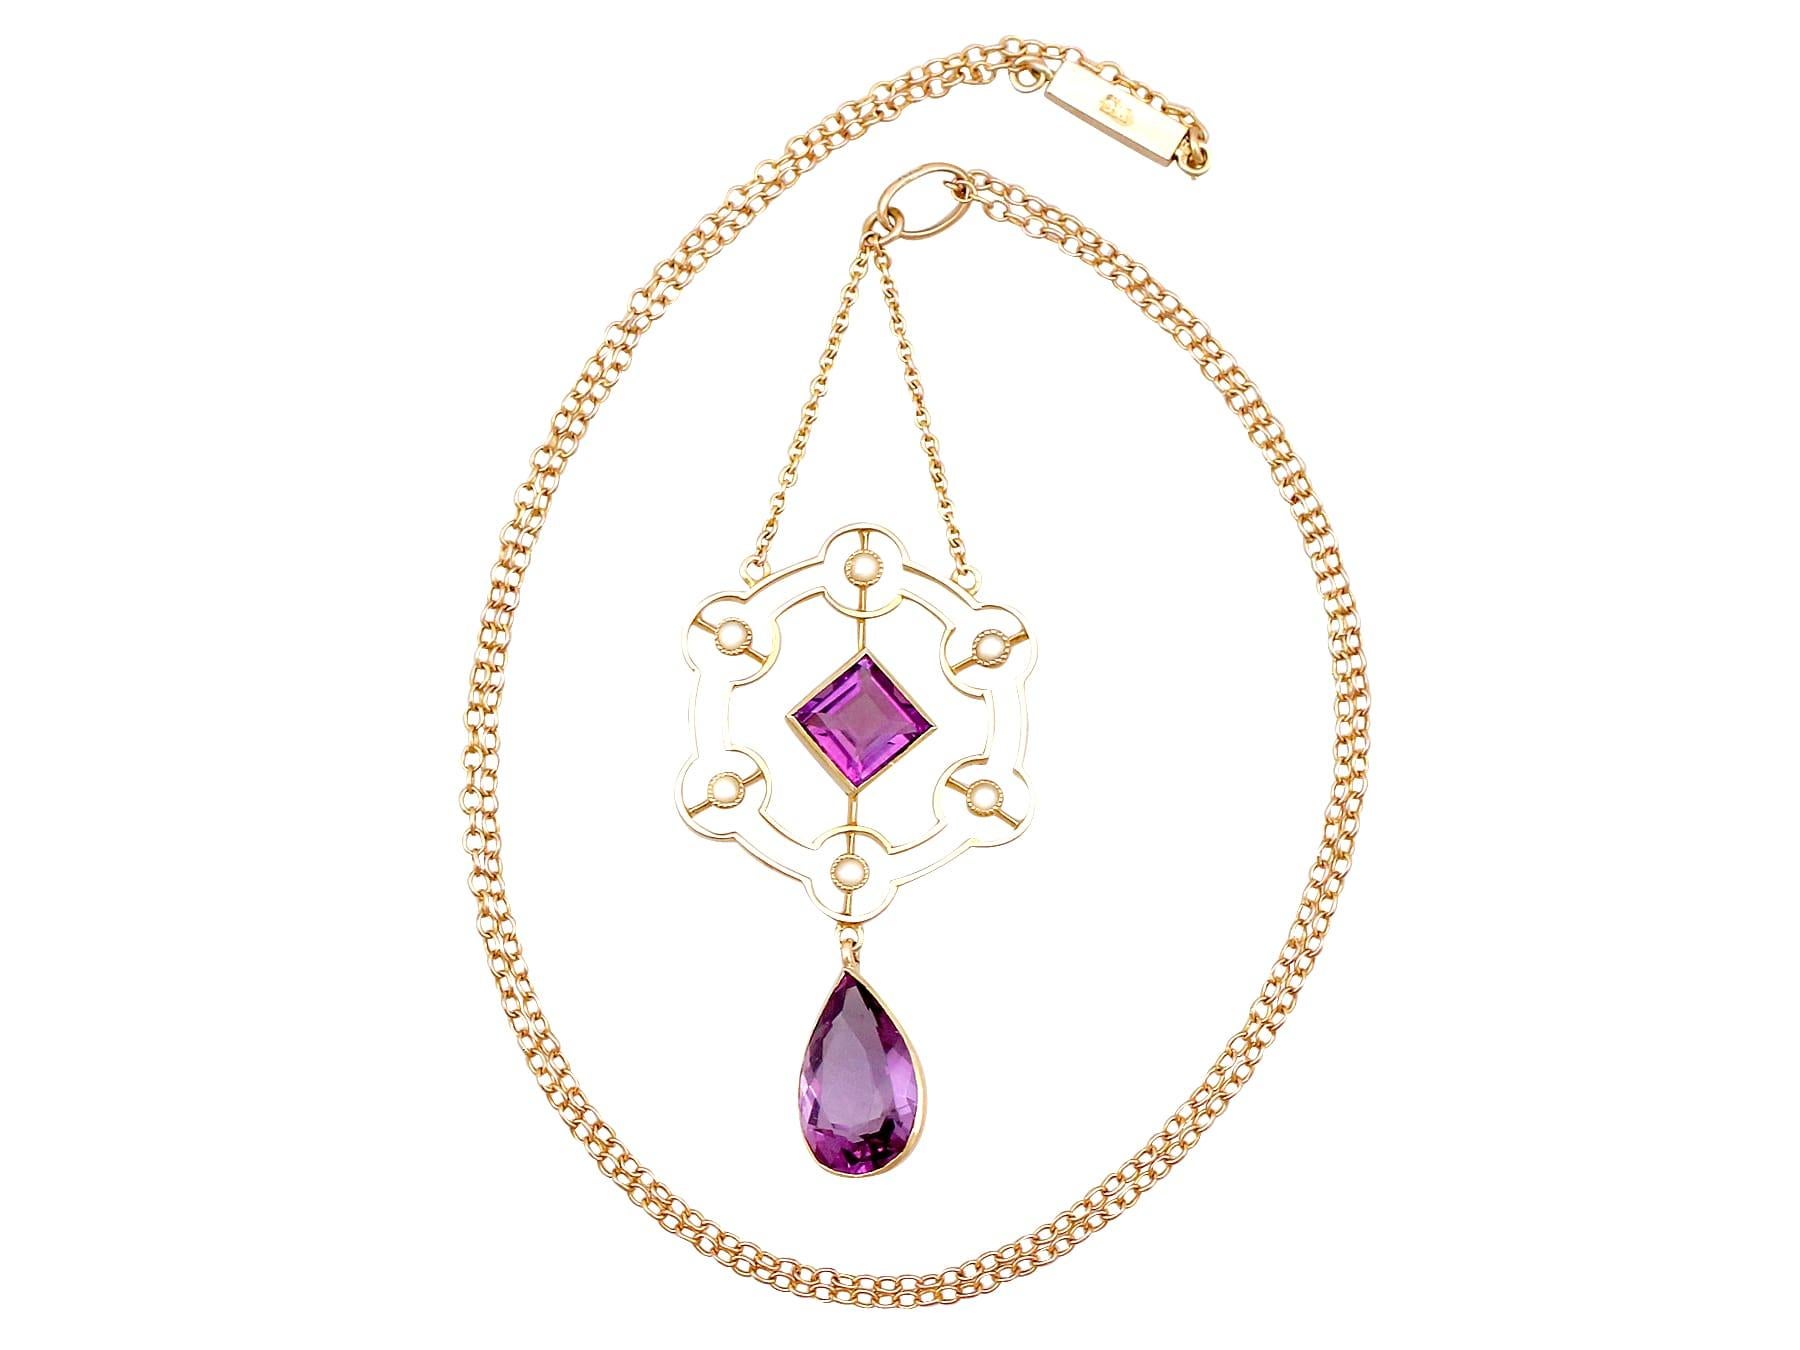 An impressive antique Victorian 2.40 carat amethyst and seed pearl, 9 karat yellow gold pendant and chain; part of our diverse antique jewelry and estate jewelry collections.

This fine and impressive Victorian amethyst pendant has been crafted in